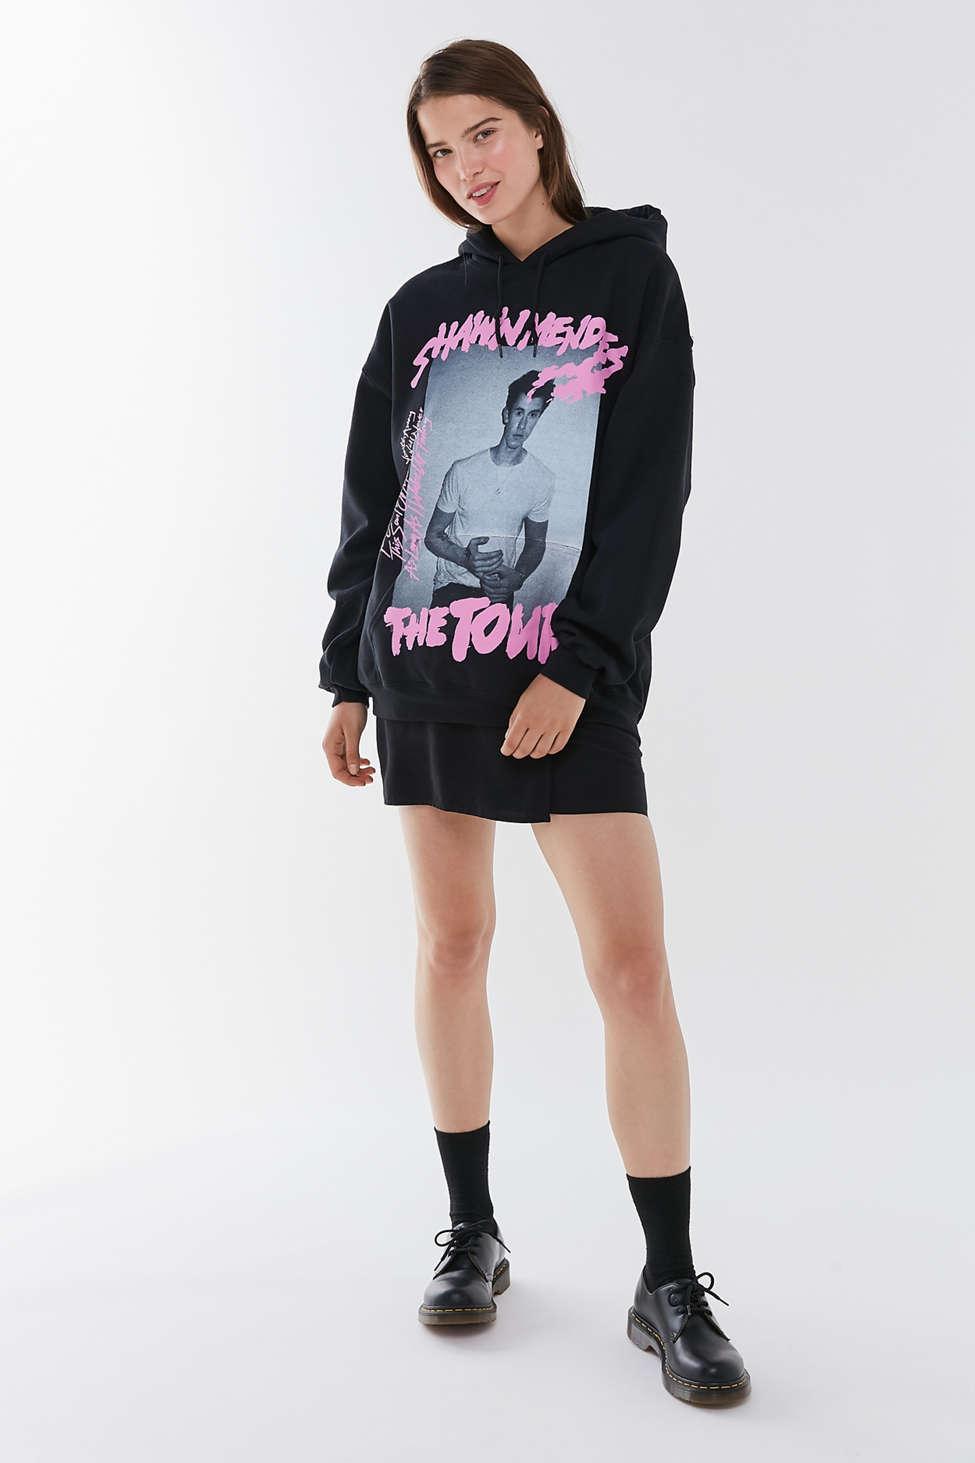 Europa inch humor Urban Outfitters Shawn Mendes: The Tour Hoodie Sweatshirt in Black | Lyst